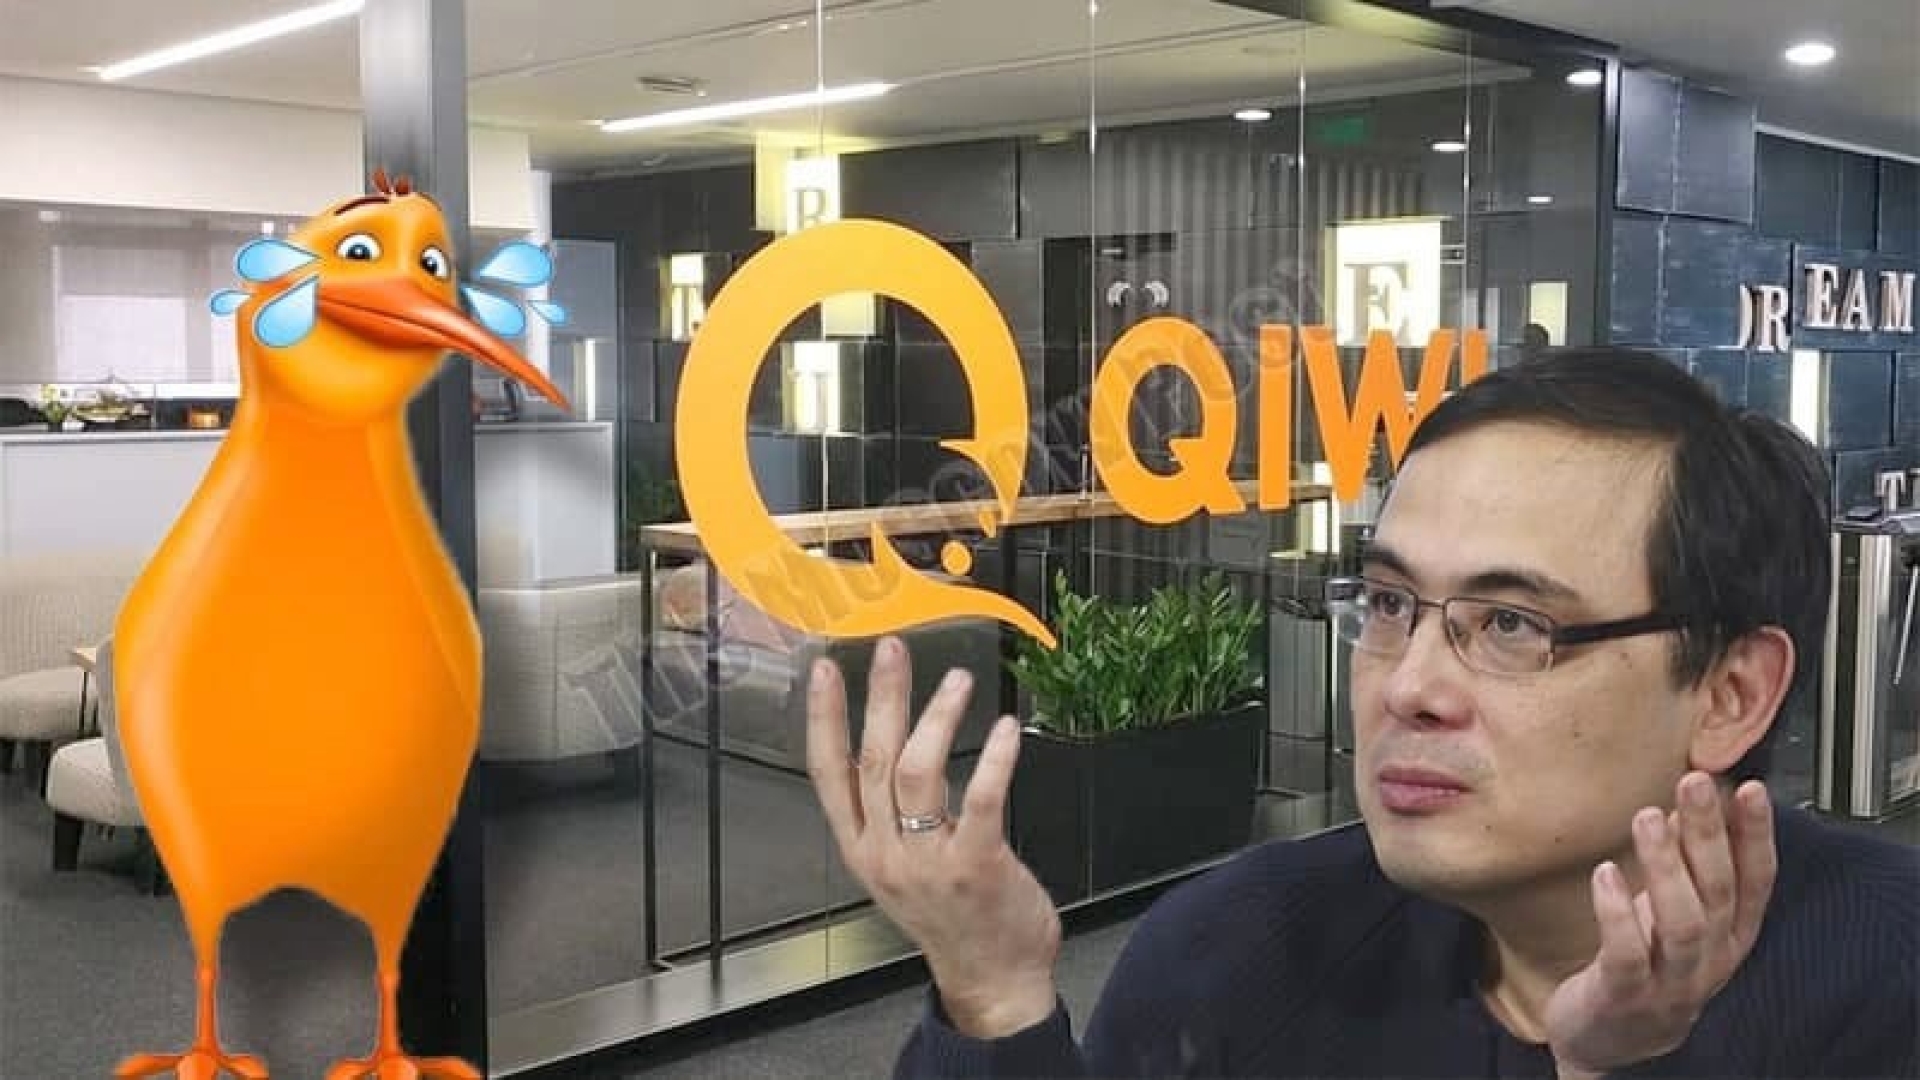 Qiwi Bank: no sorry for "bird"